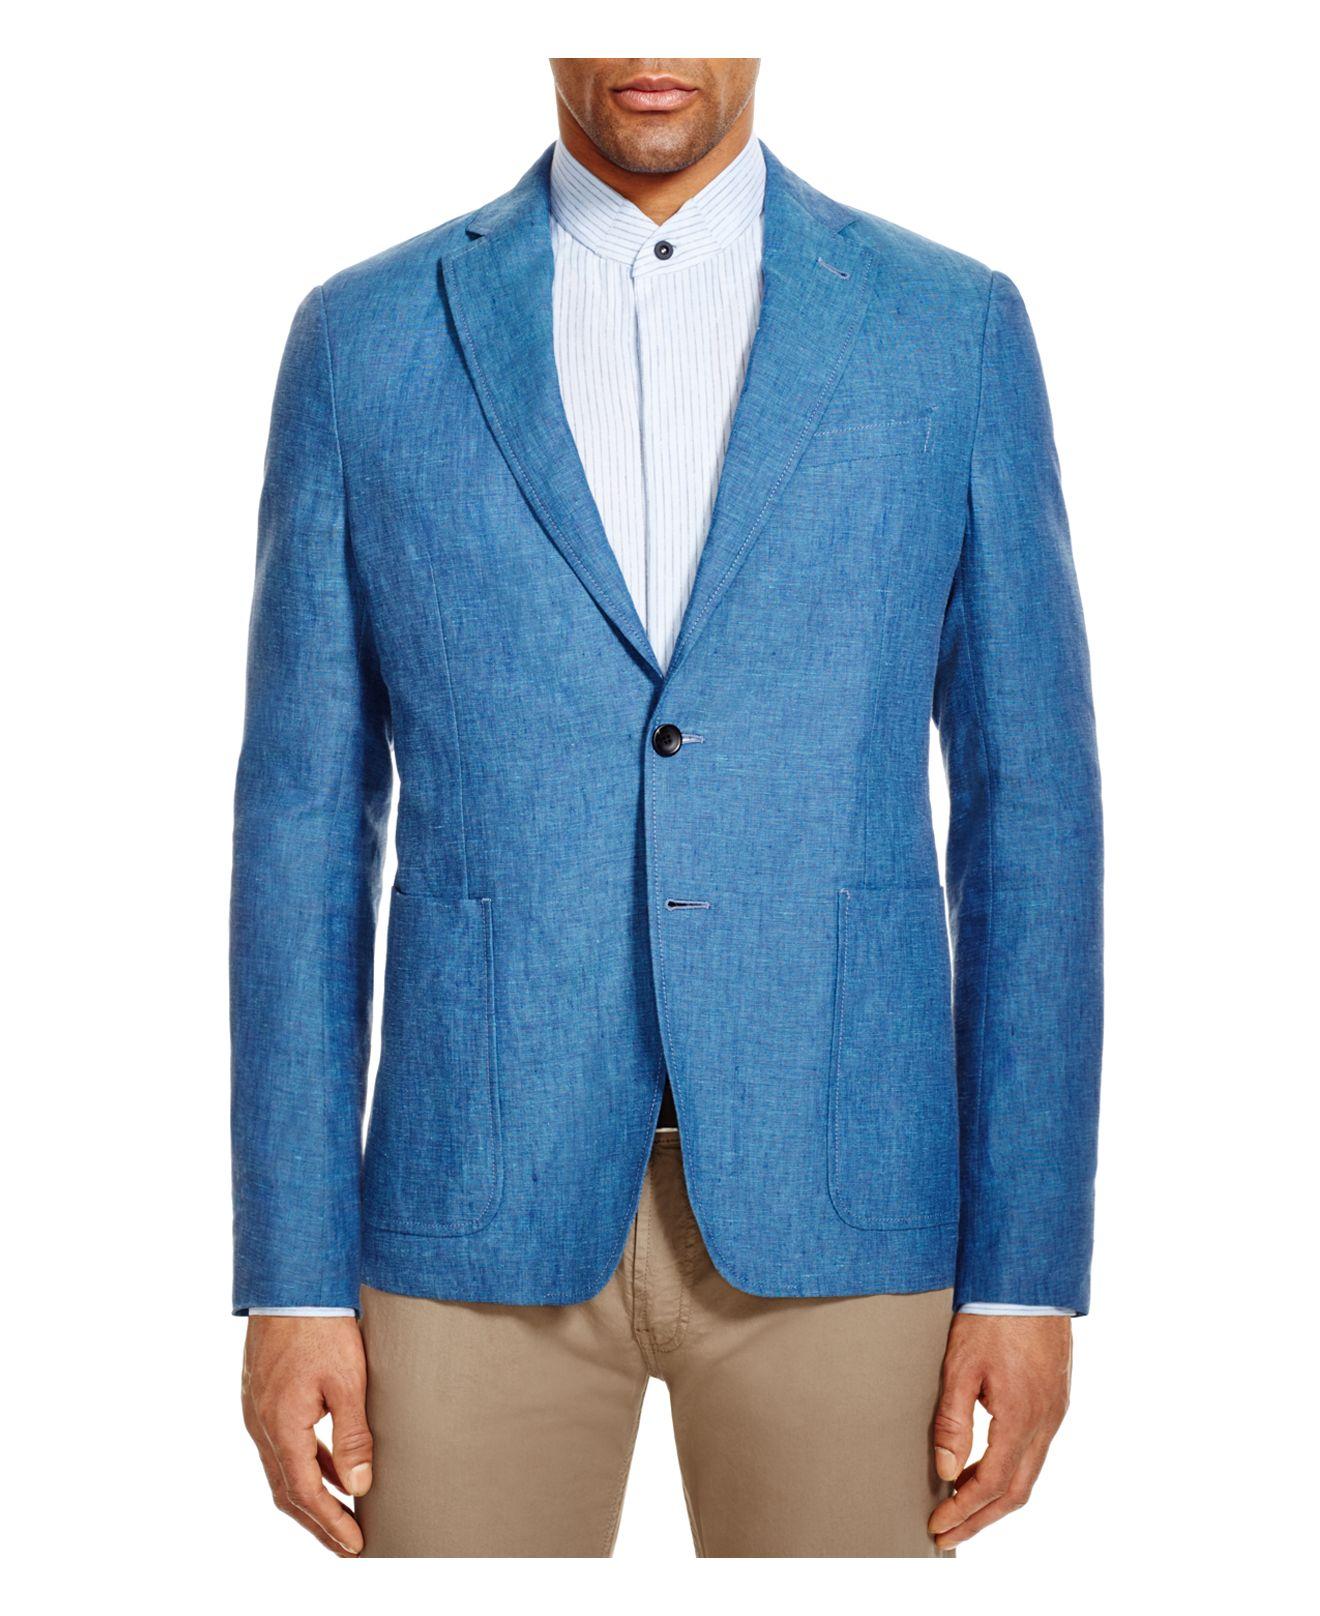 Armani Synthetic Slim Fit Sport Coat in Blue for Men - Lyst